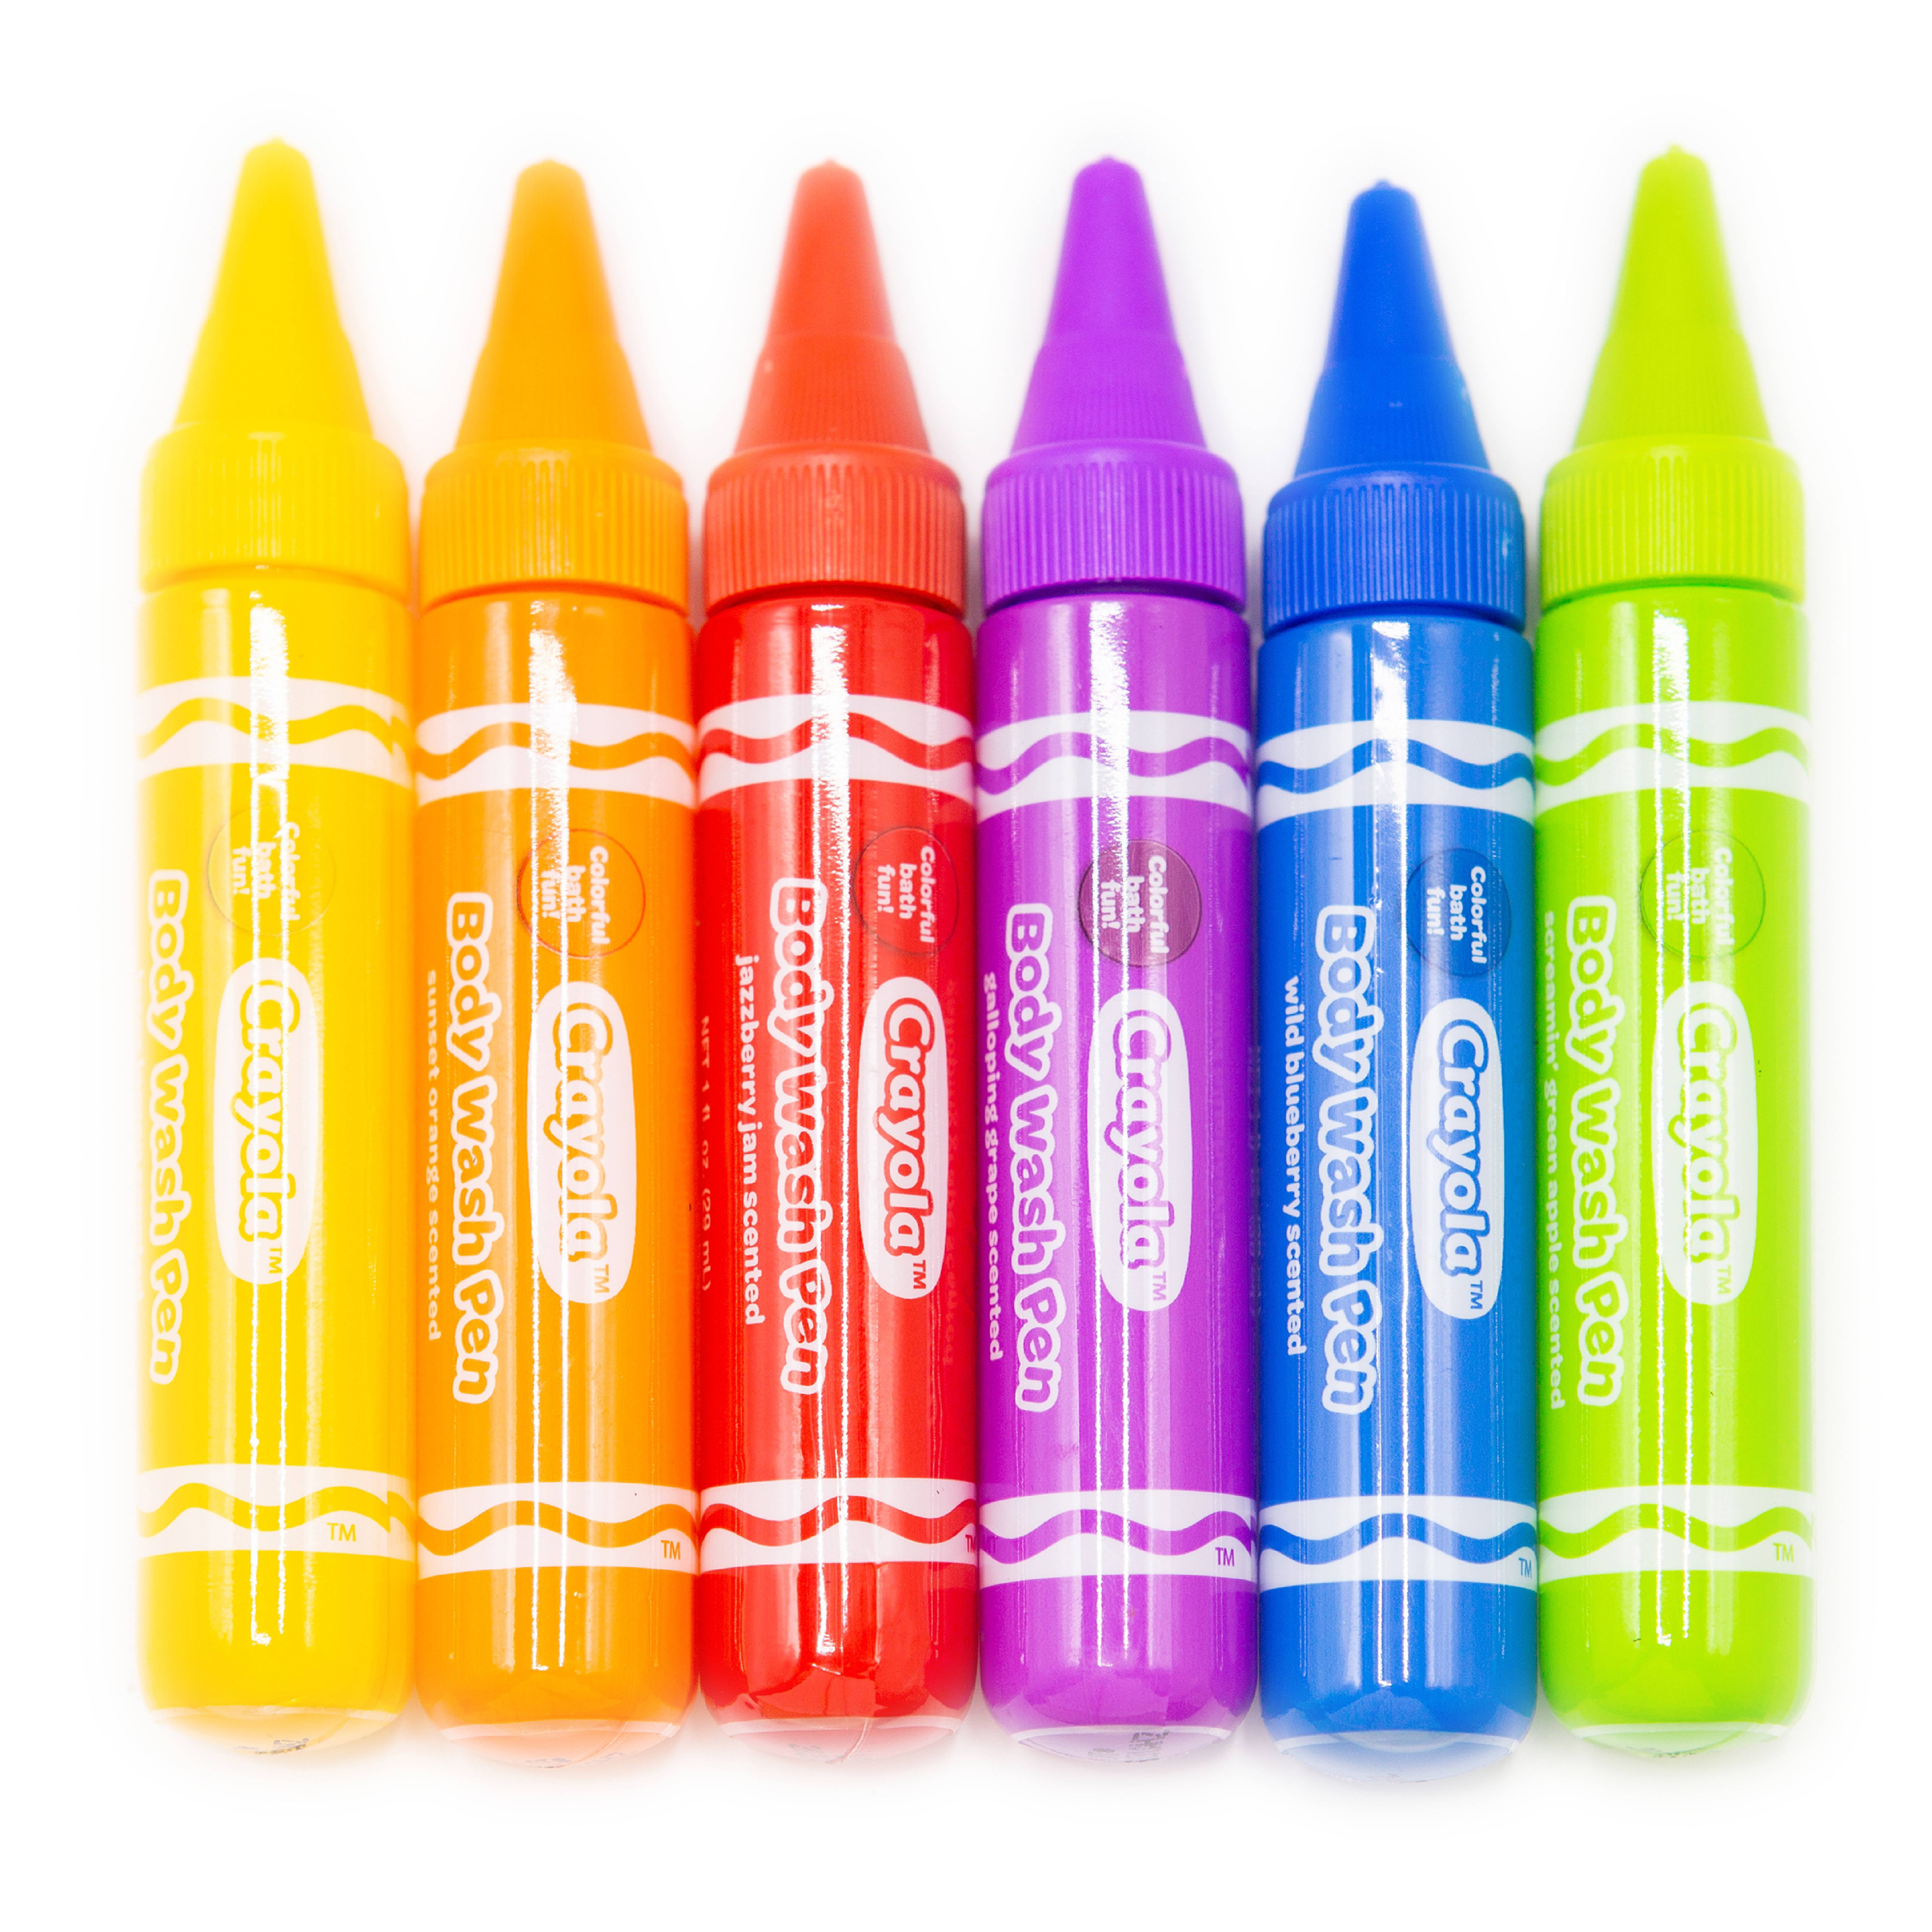 10 Crayola Bathtub Body Wash GEL Pens for Kids With Scents Ages 3